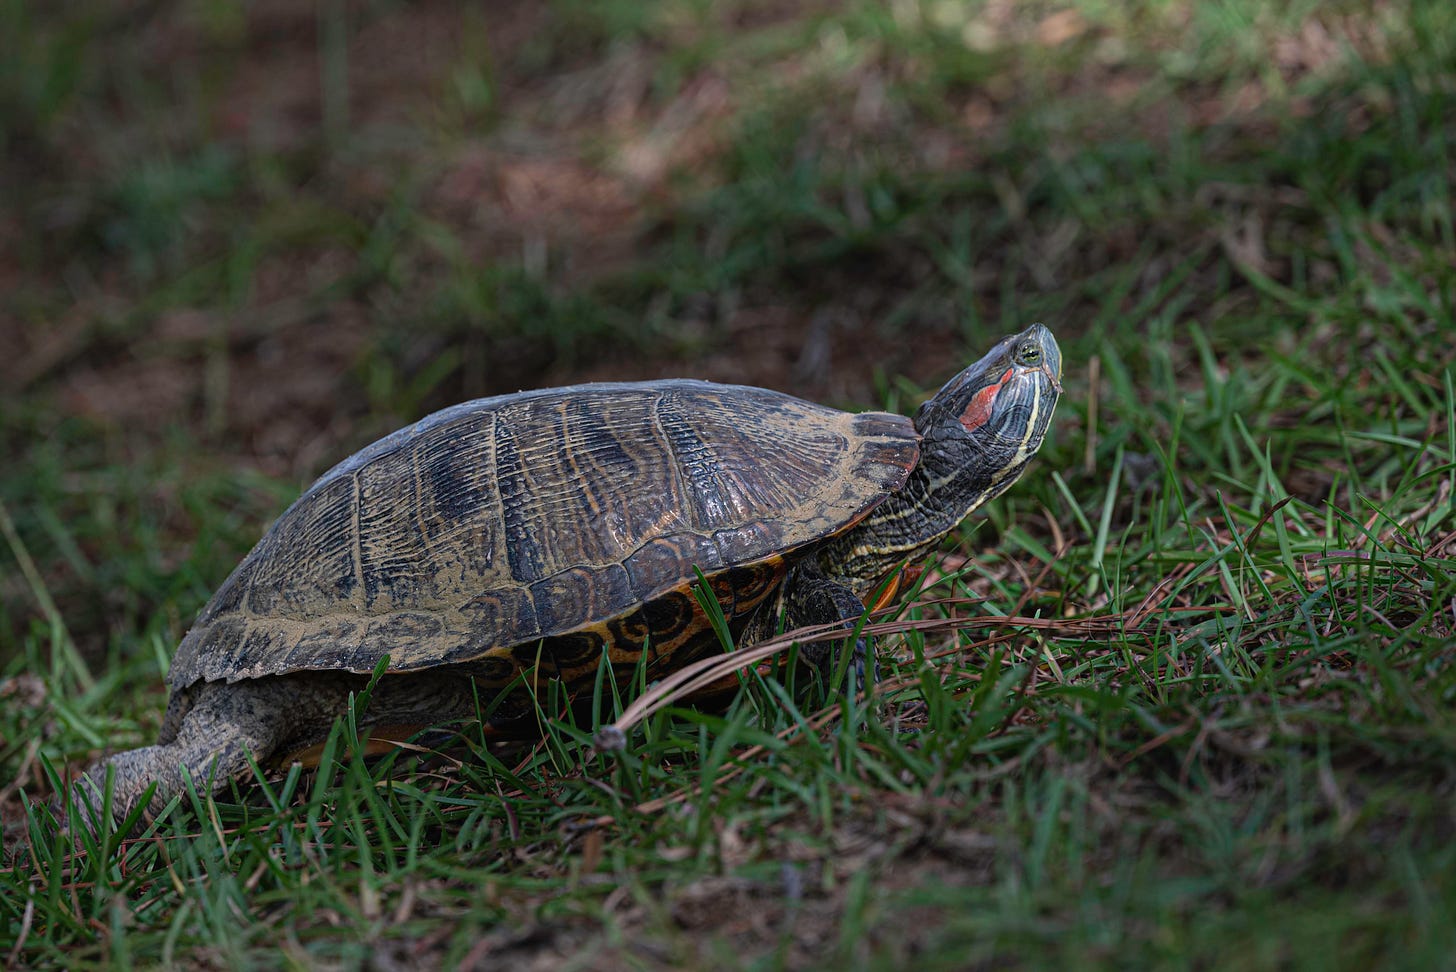 Female red-eared turtle in the grass laying her eggs